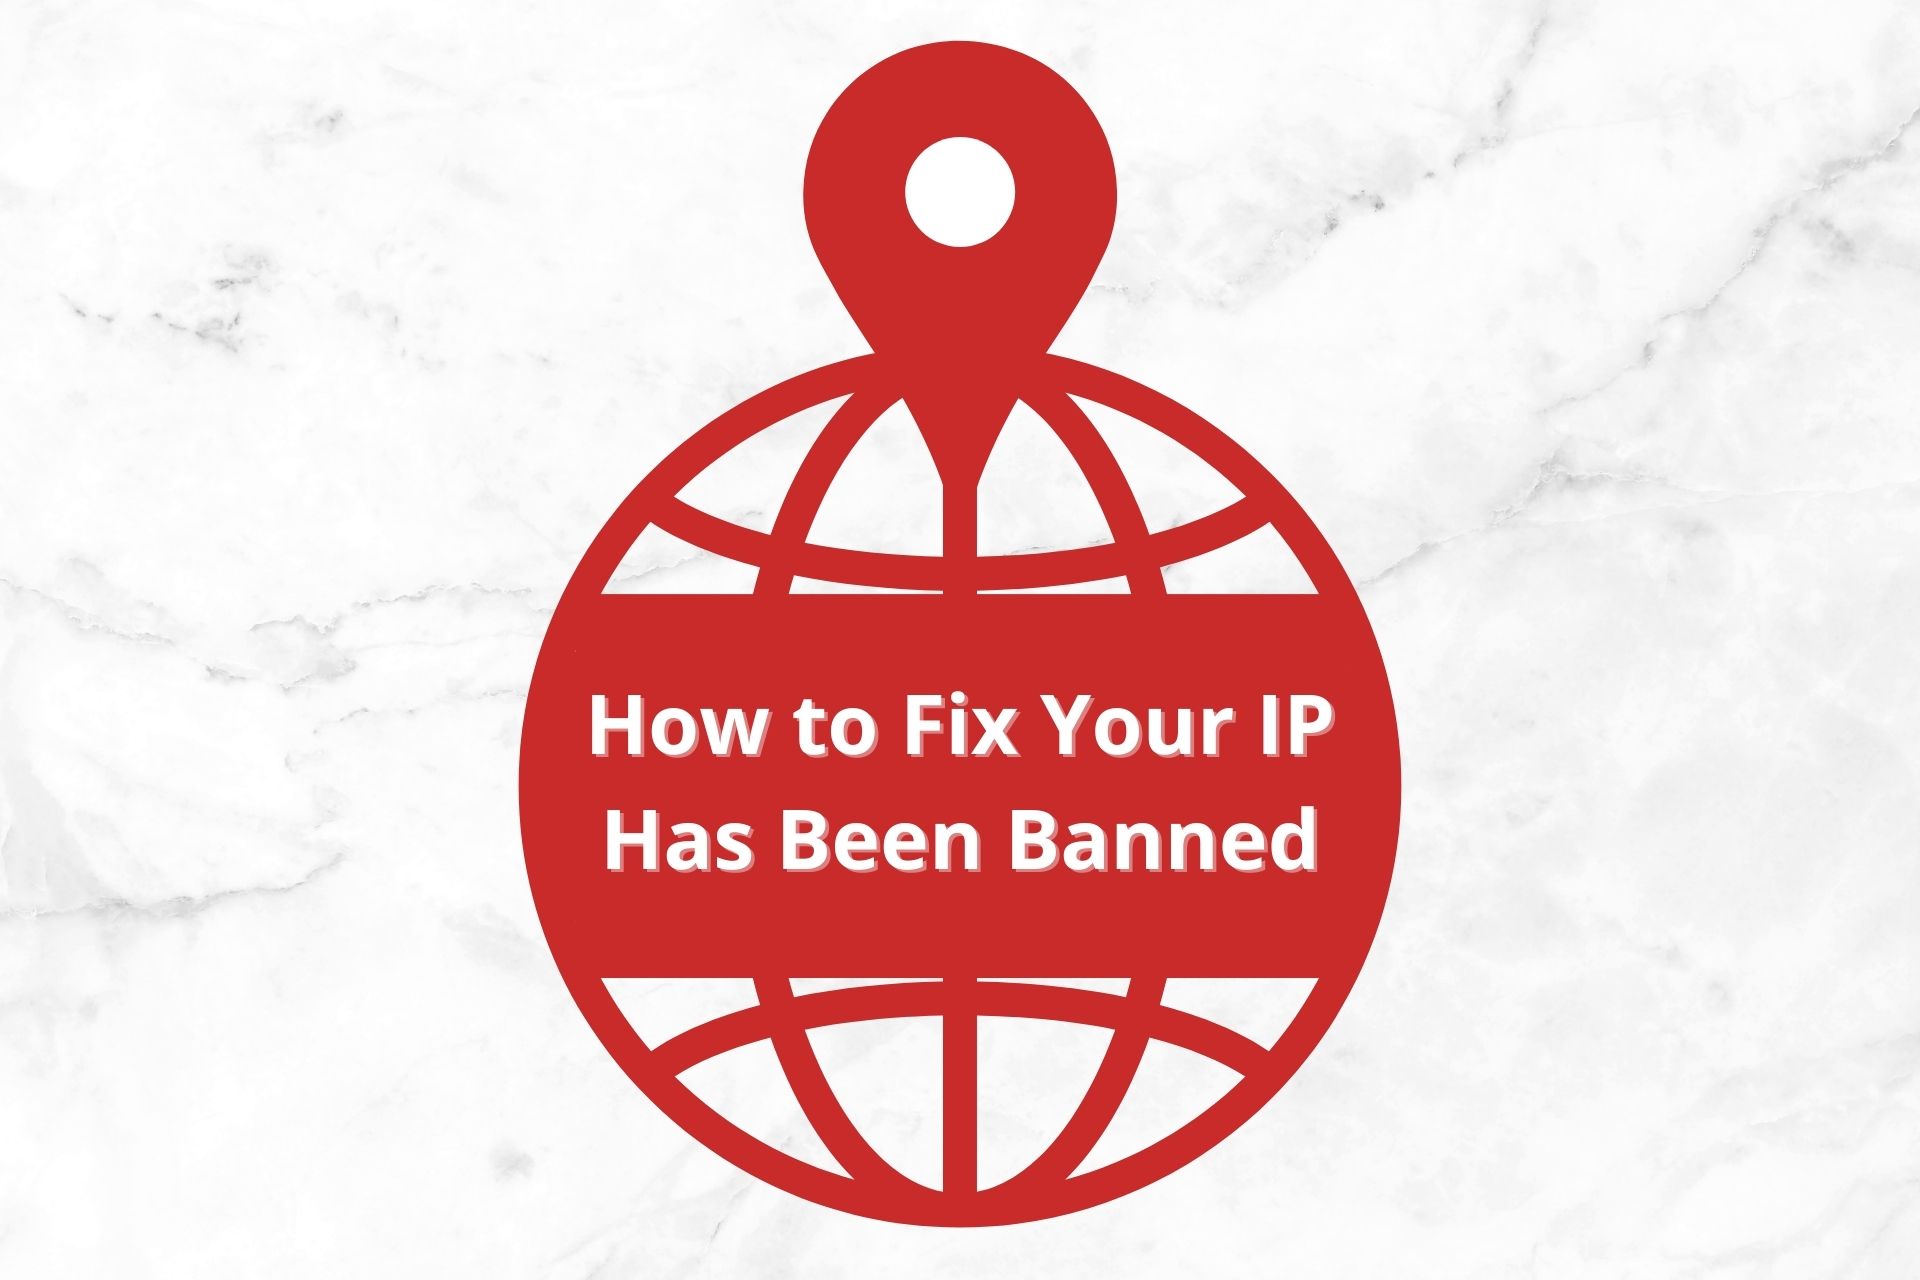 How to Fix Your IP Has Been Banned